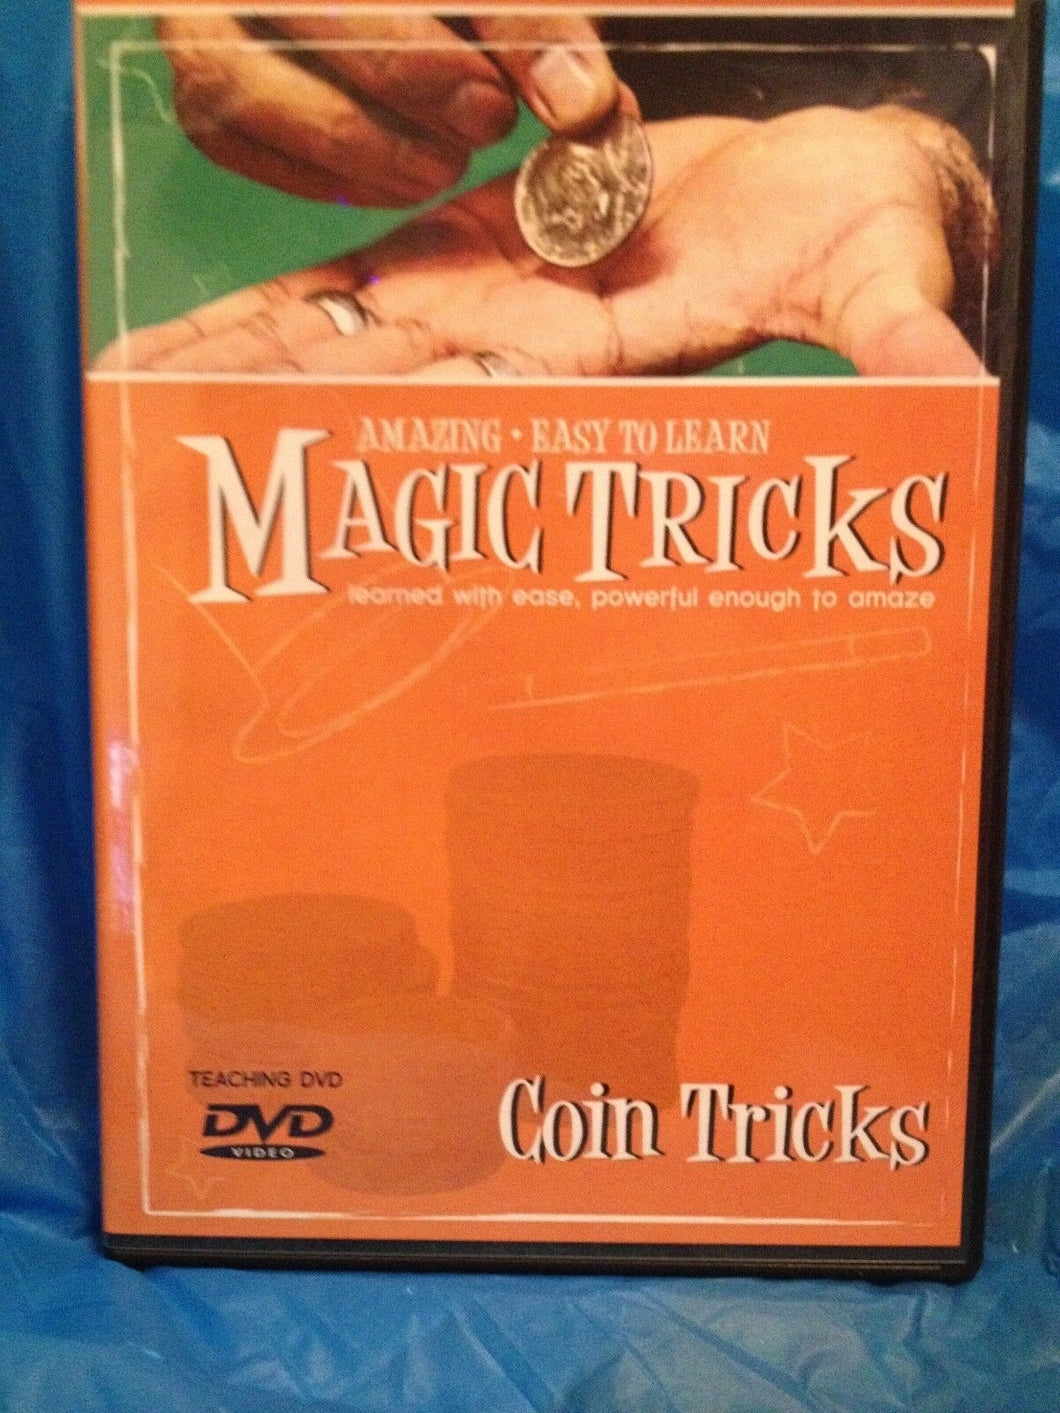 Amazing Easy to Learn Magic Tricks:  Coin Tricks!  Digital Download - Use Regular Coins